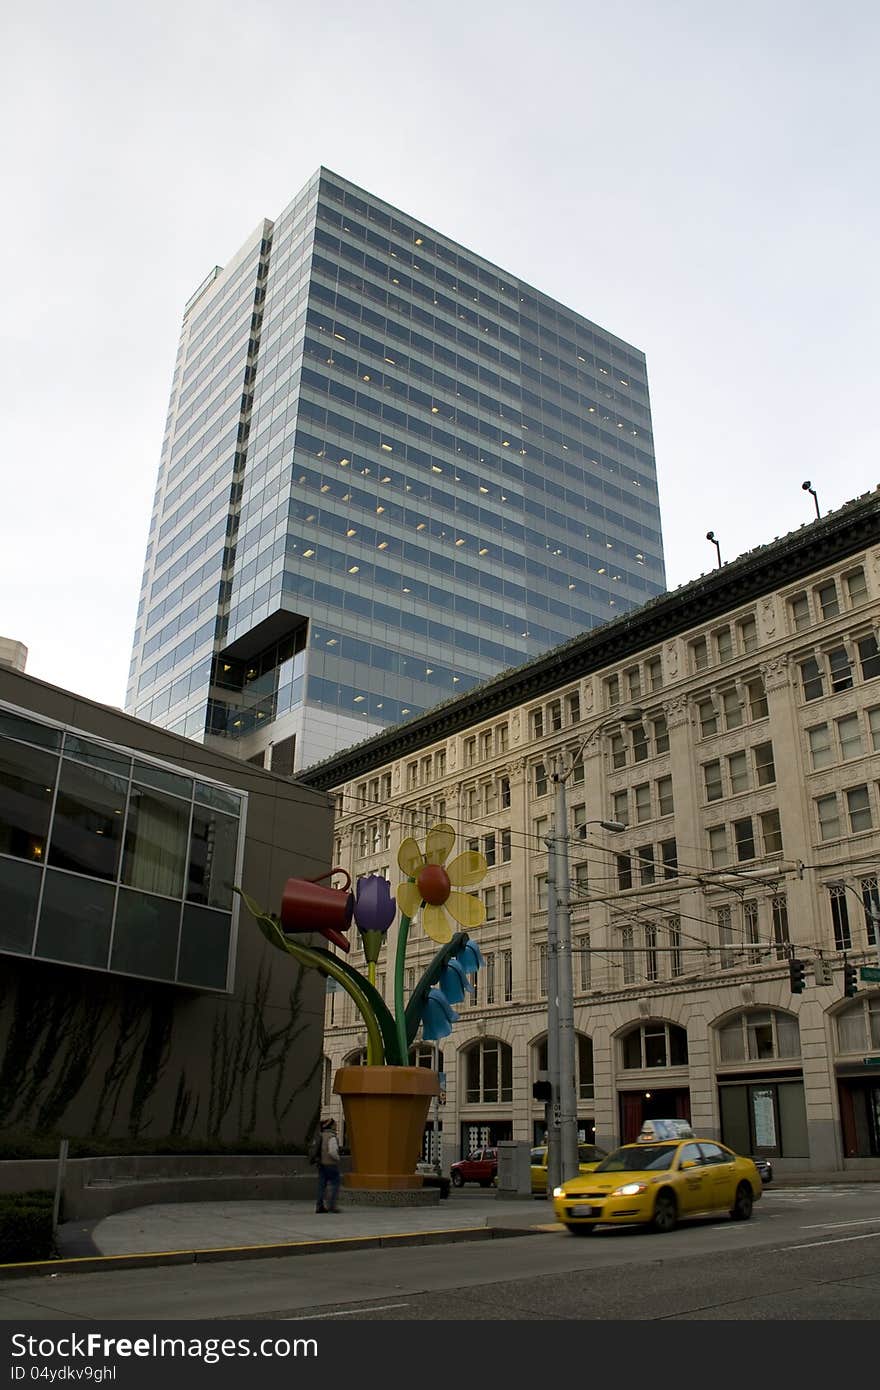 Unique buildings and street views at downtown Seattle